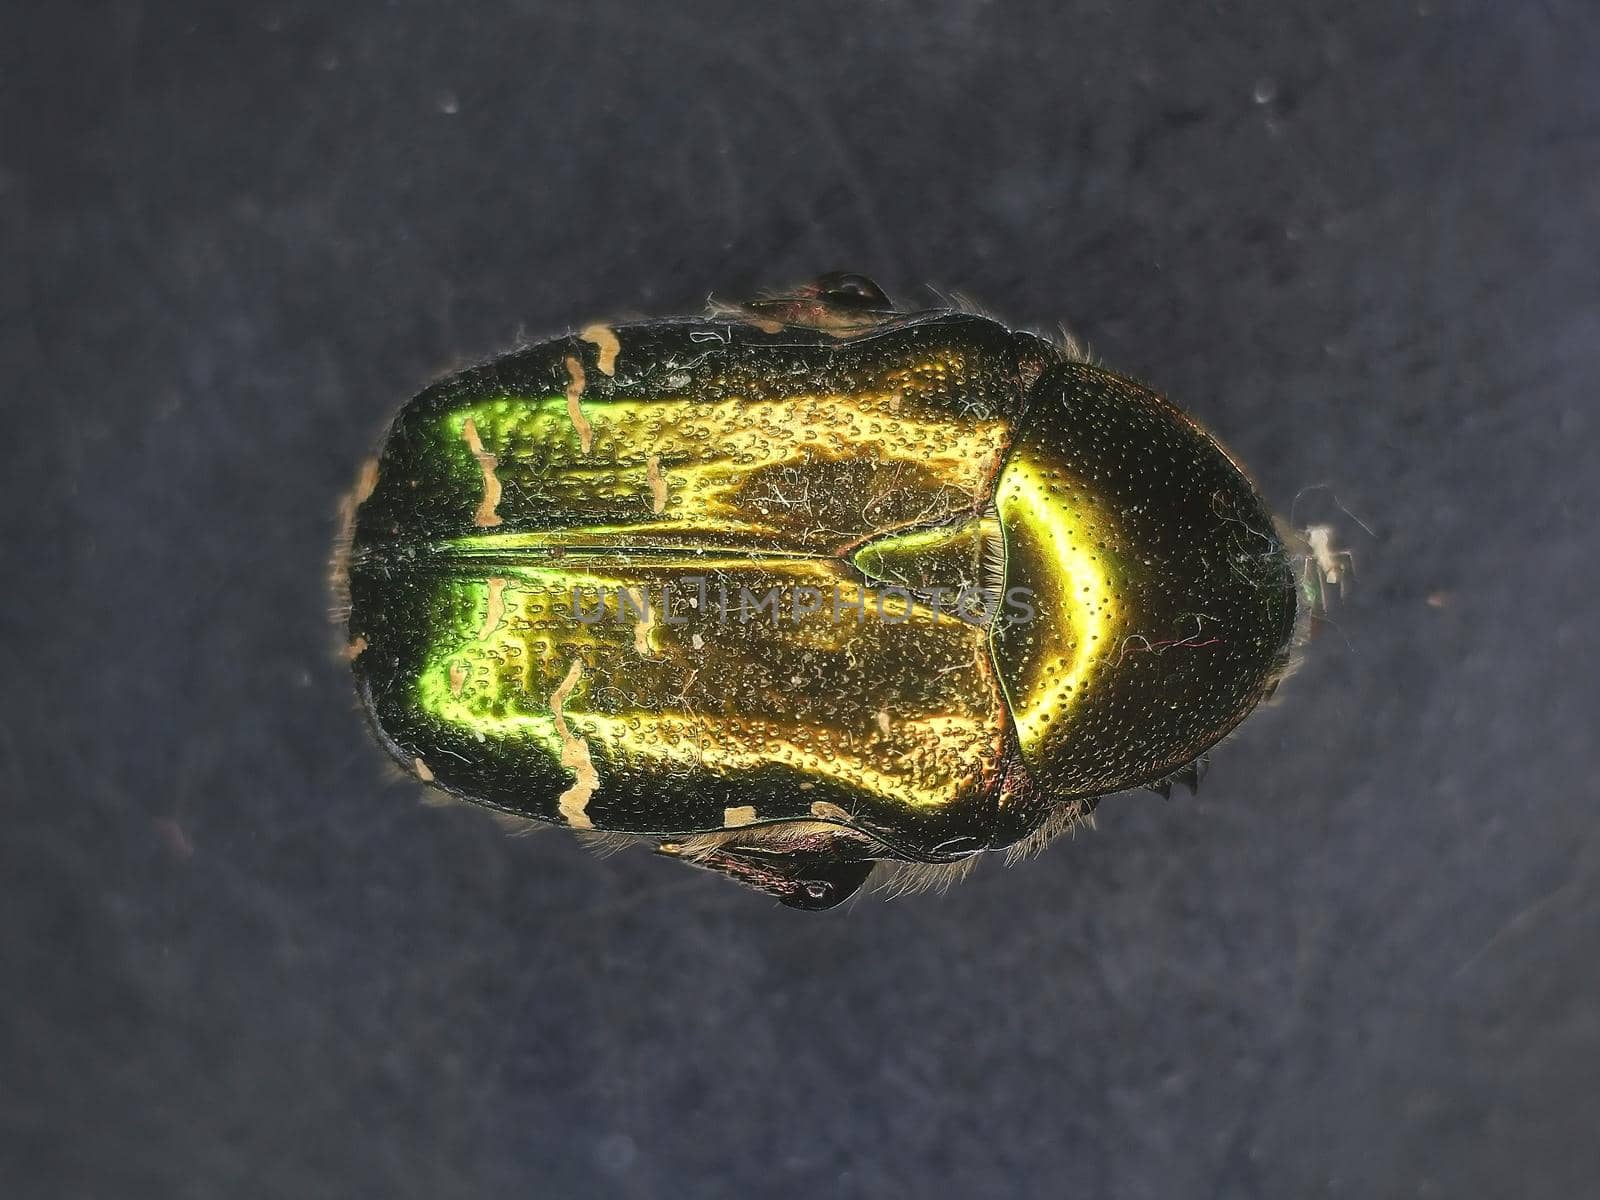 Flower chafer under a microscope